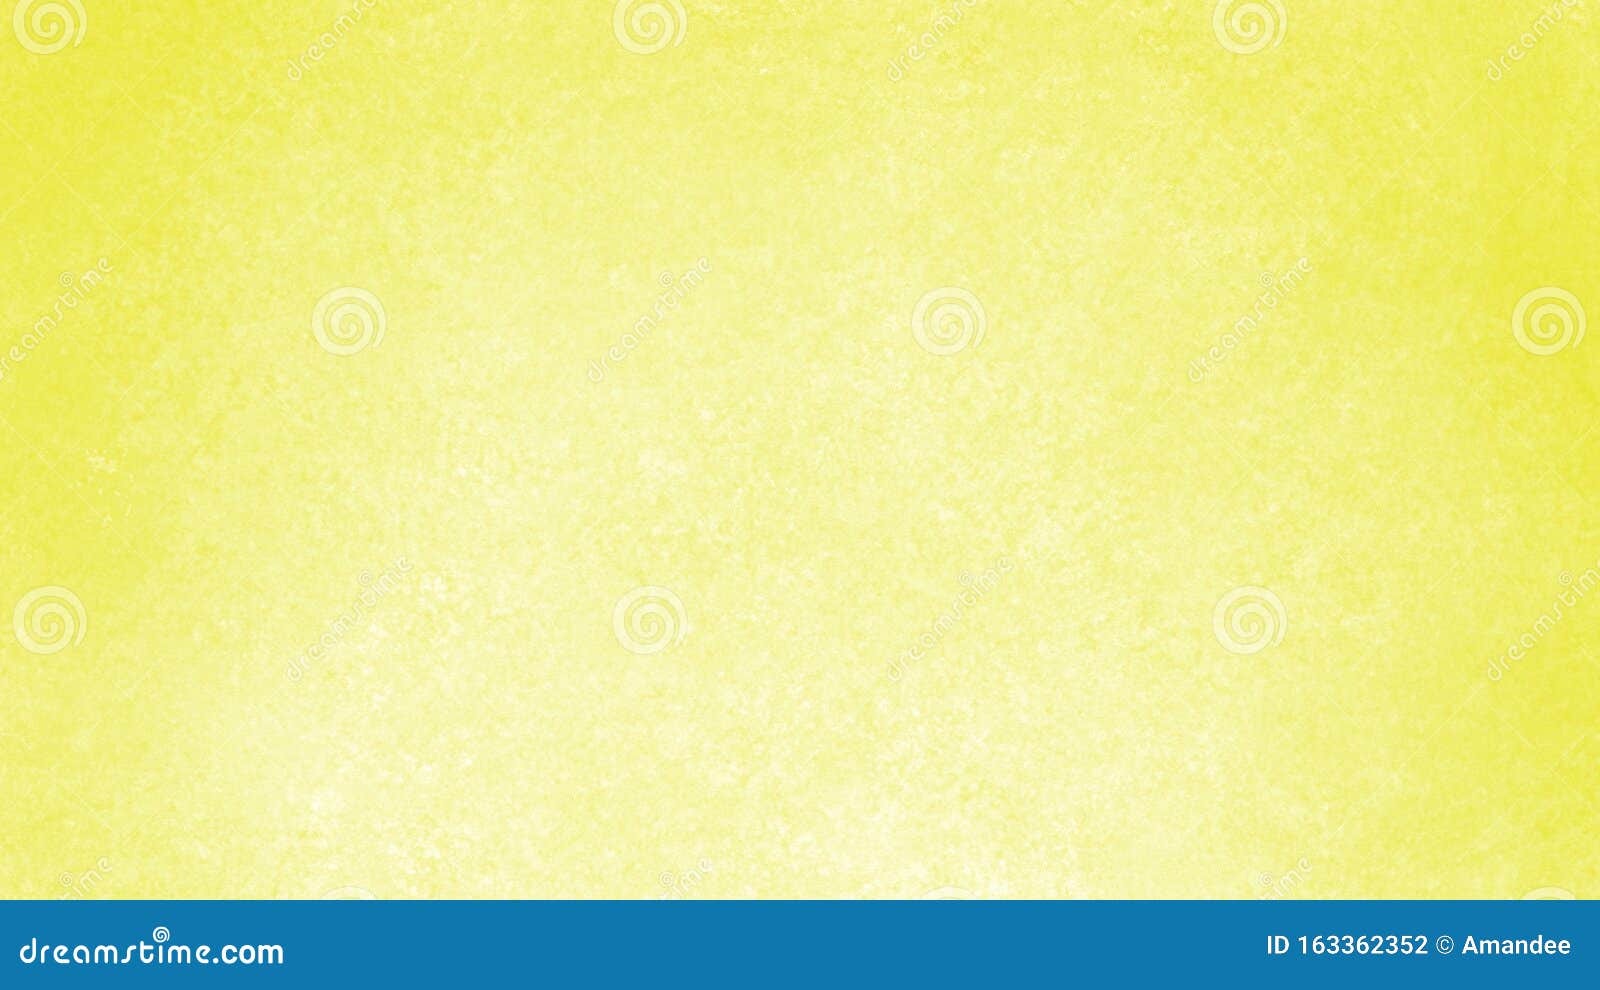 Lemon Yellow Background with White Center and Dark Yellow Border with  Texture Pattern Design. Cheerful Background Color Stock Illustration -  Illustration of layout, grunge: 163362352